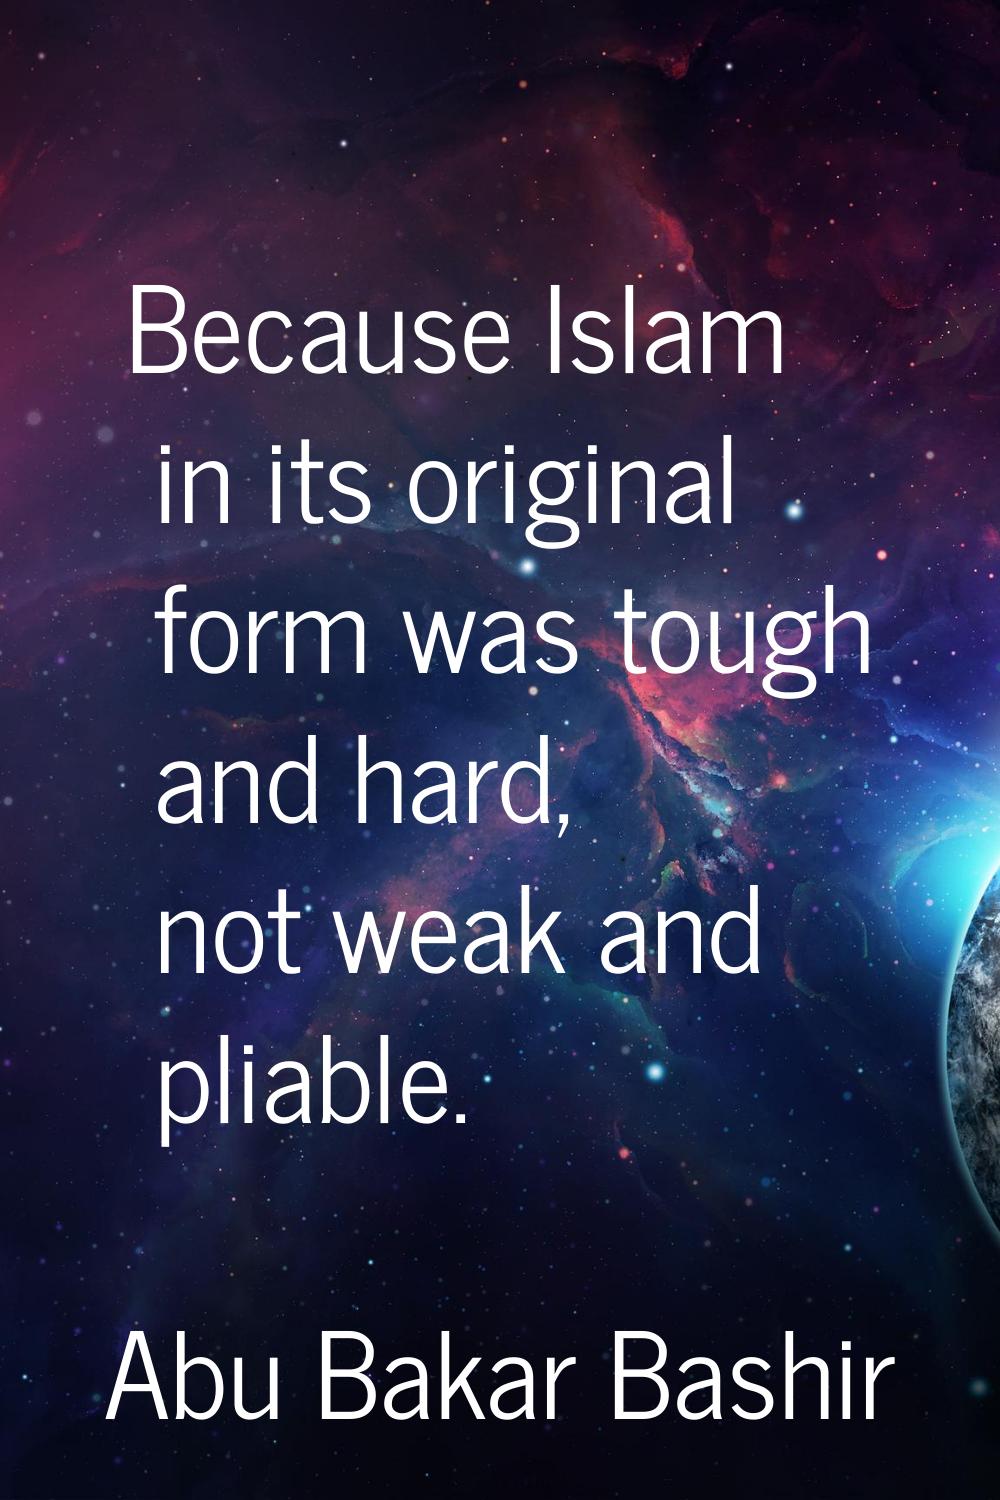 Because Islam in its original form was tough and hard, not weak and pliable.